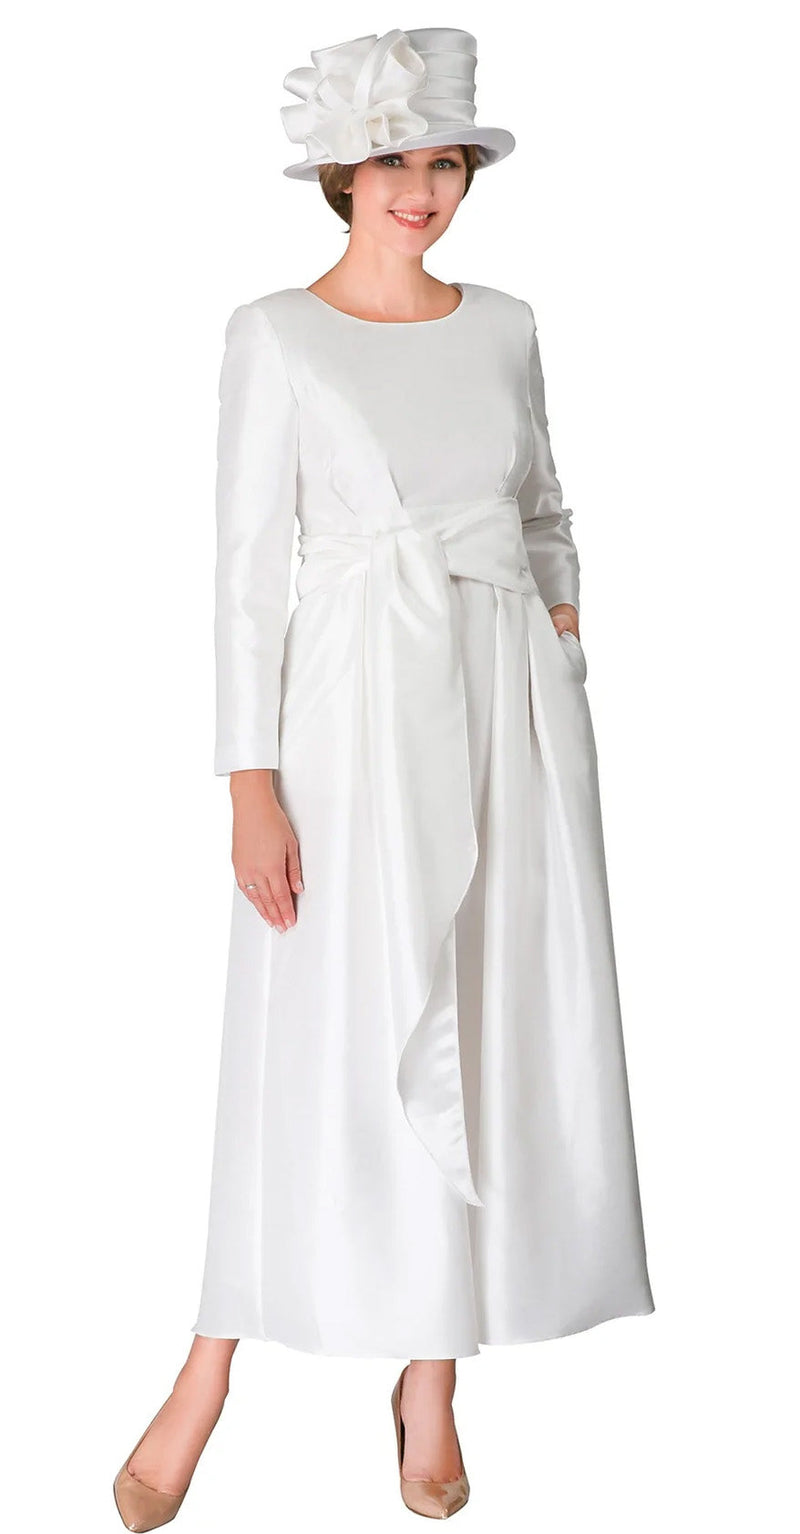 Giovanna Dress D1508-White - Church Suits For Less